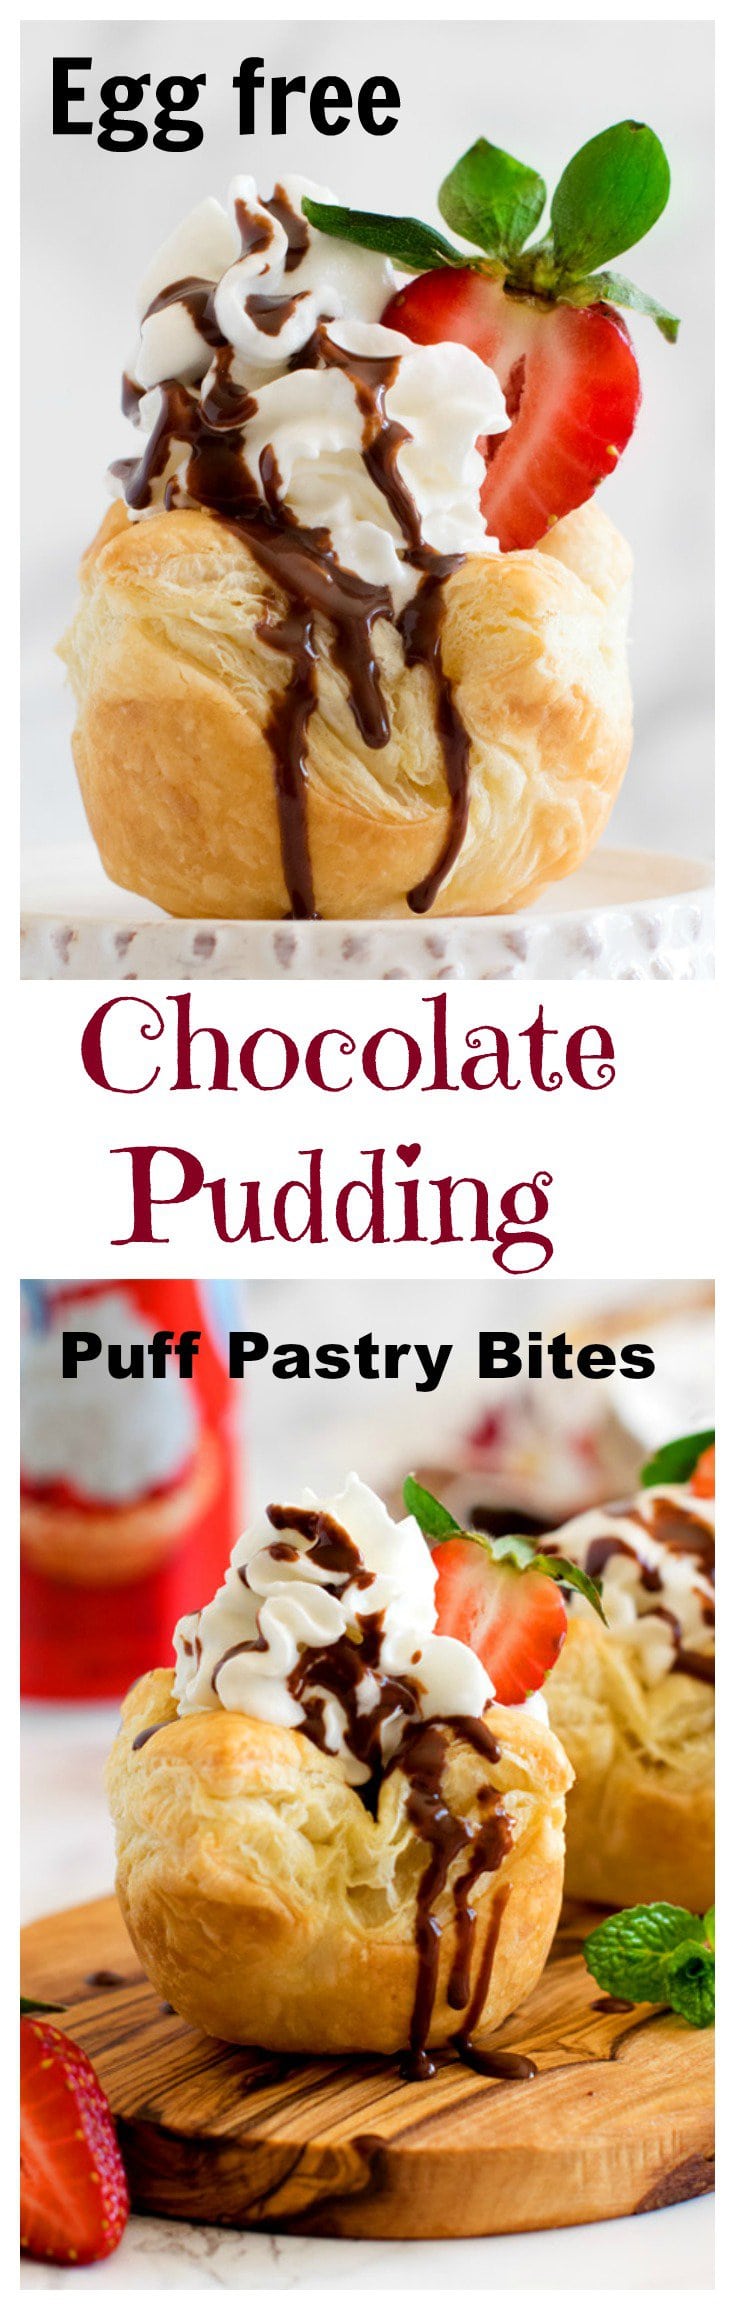 Egg free chocolate pudding puff pastry bites